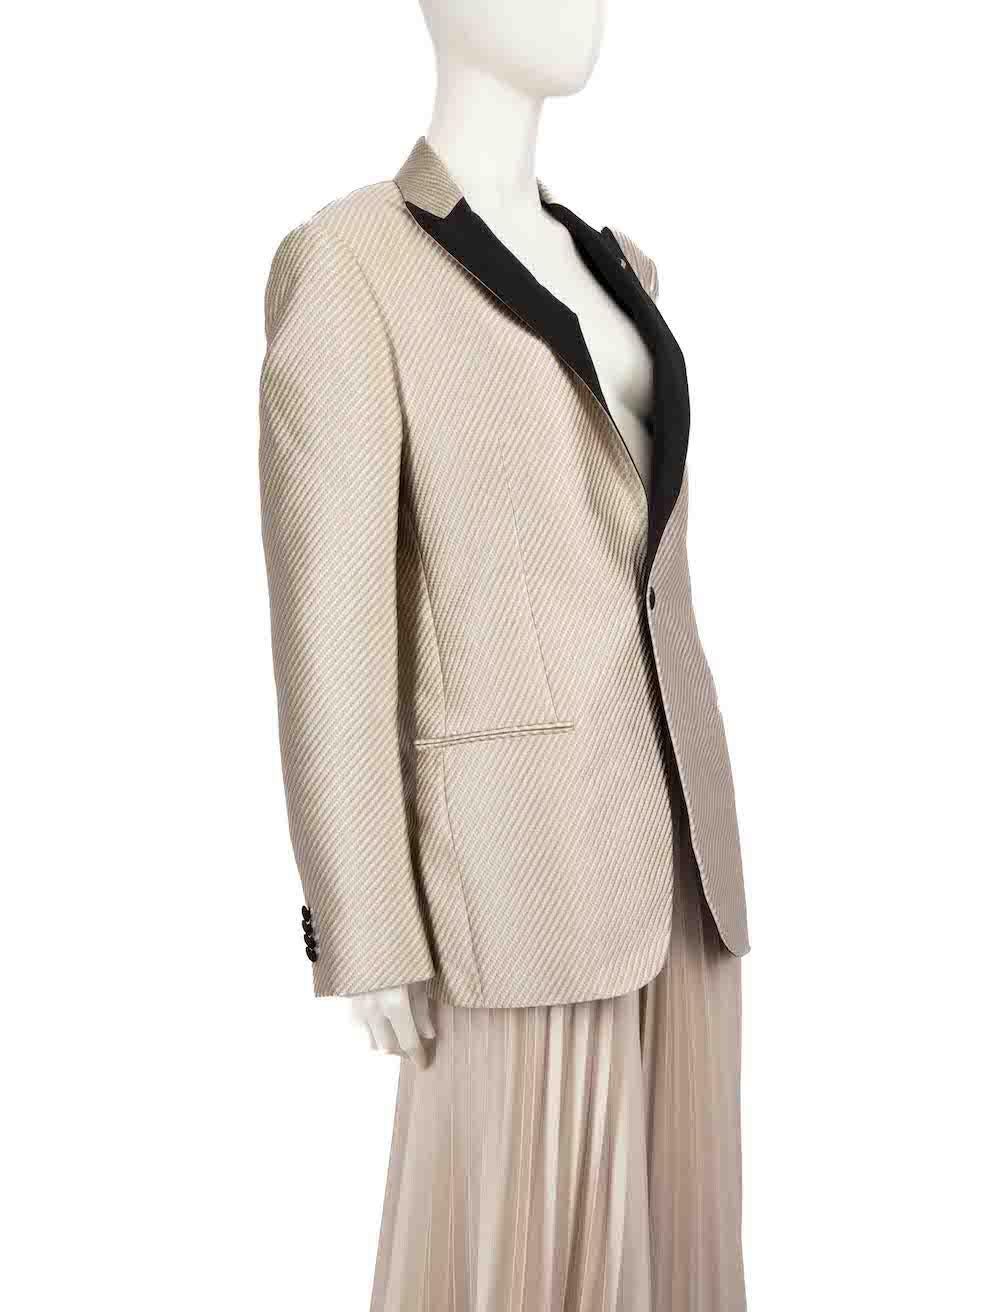 CONDITION is Very good. Minimal wear to the blazer is evident. Minimal pull to thread on the front top right side and the bottom rear lining on this used Giorgio Armani designer resale item.
 
 
 
 Details
 
 
 Ecru
 
 Polyester
 
 Blazer
 
